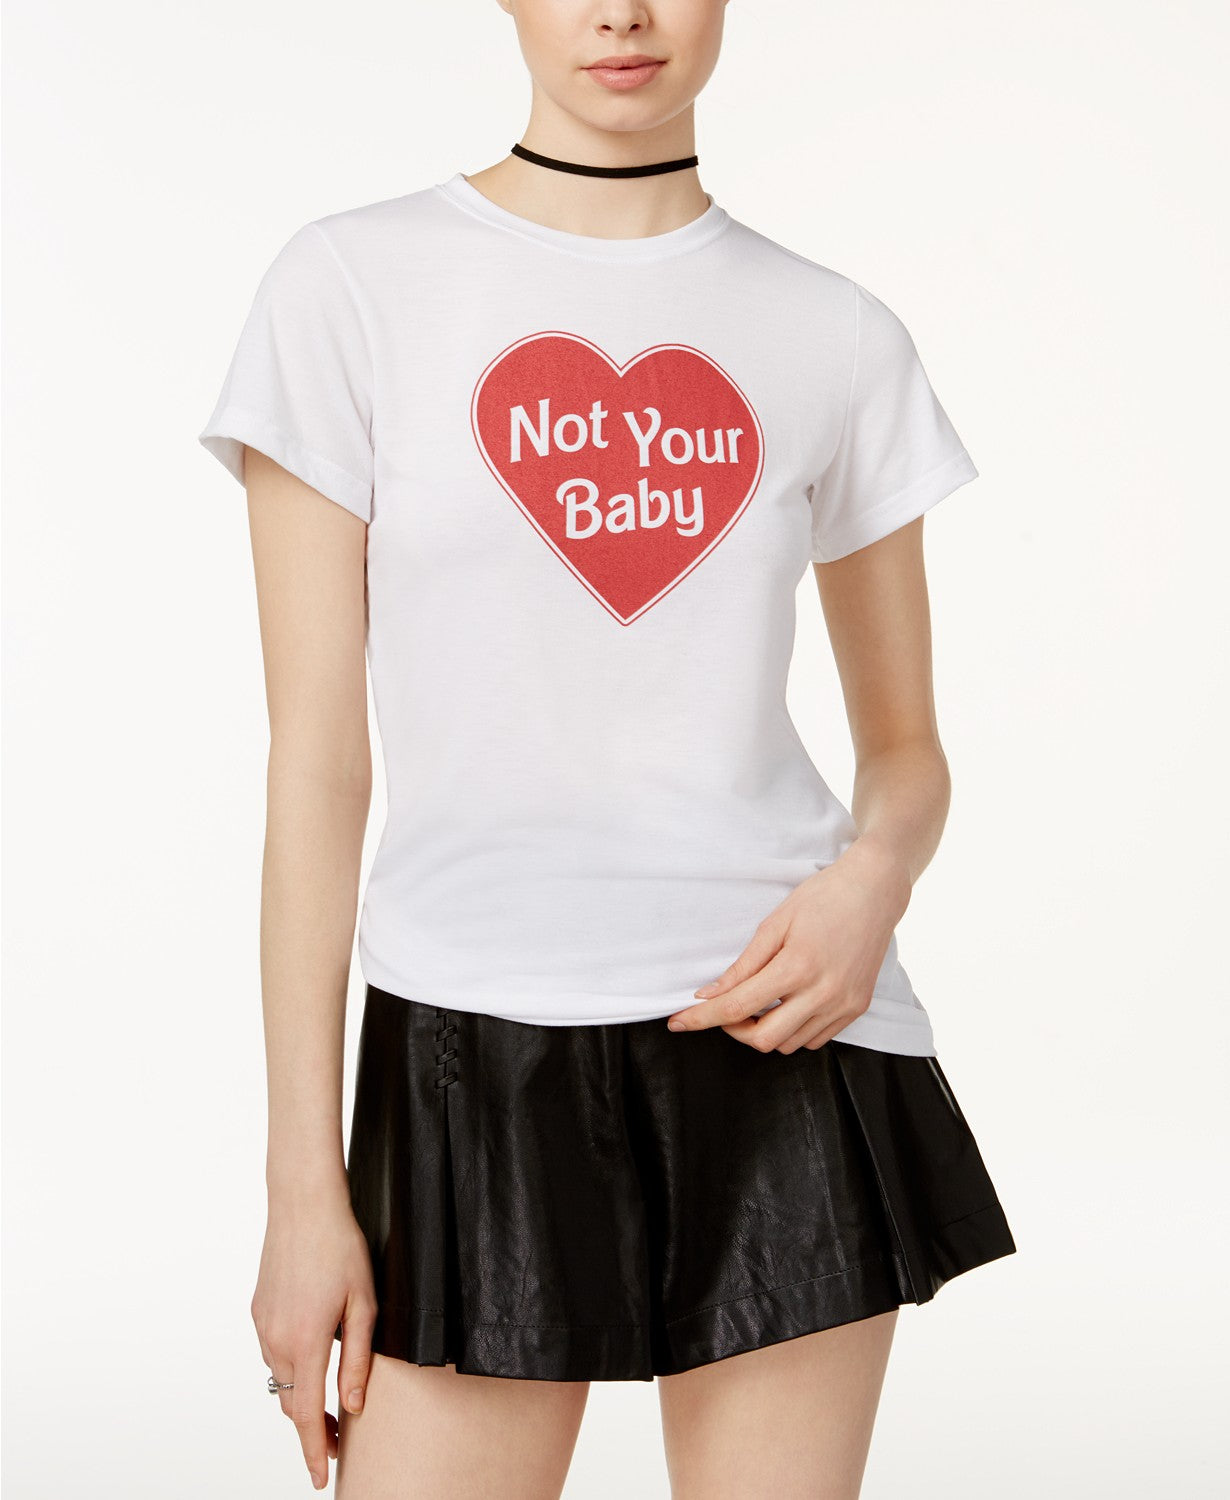 KID DANGEROUS Not Your Baby Graphic T-Shirt White L